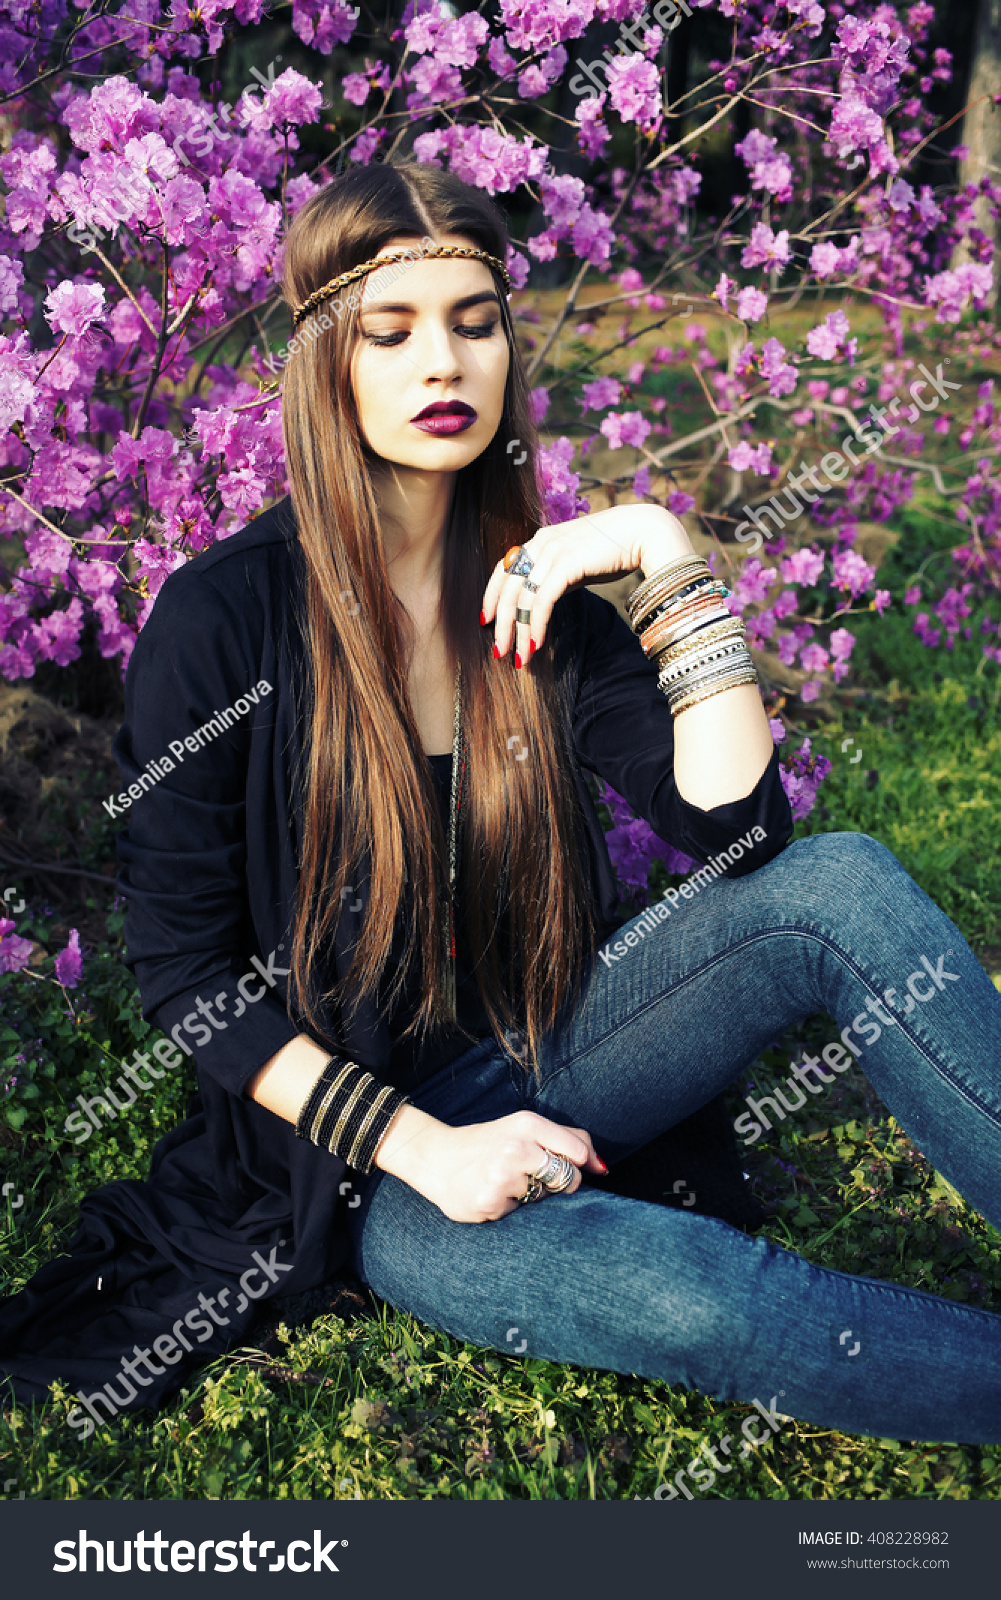 model poses for fashion photography outdoors